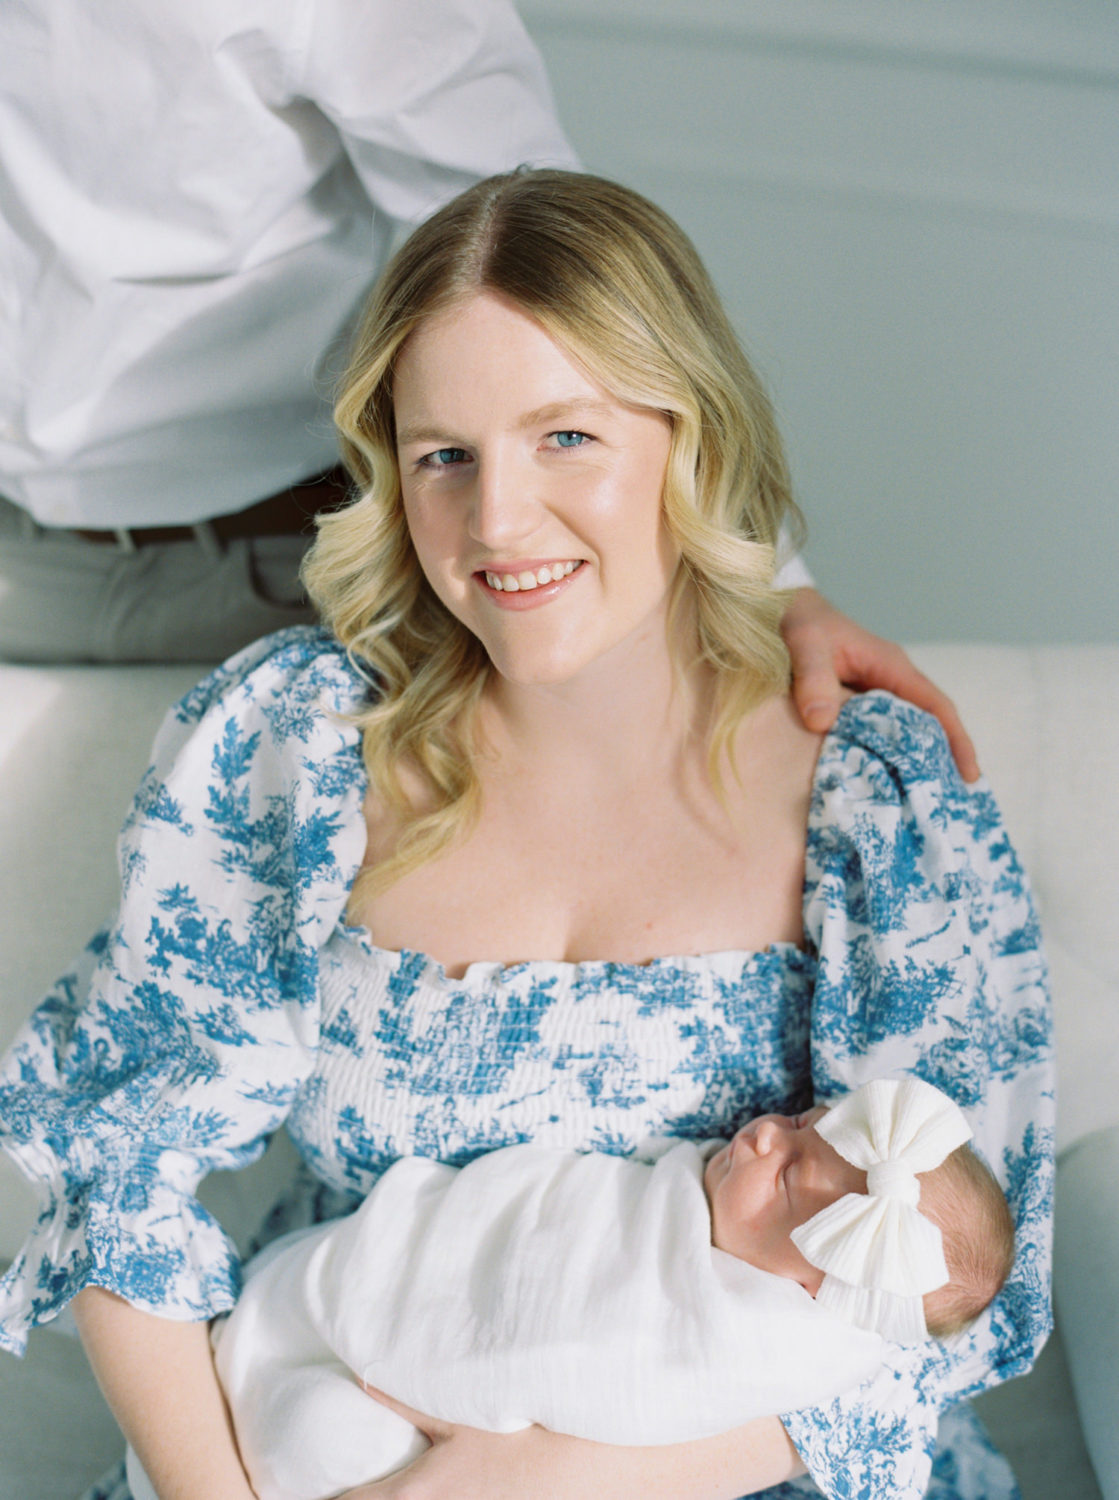 blonde blue eyed new mom wearing a blue and white dress smiling at the camera and holding her baby